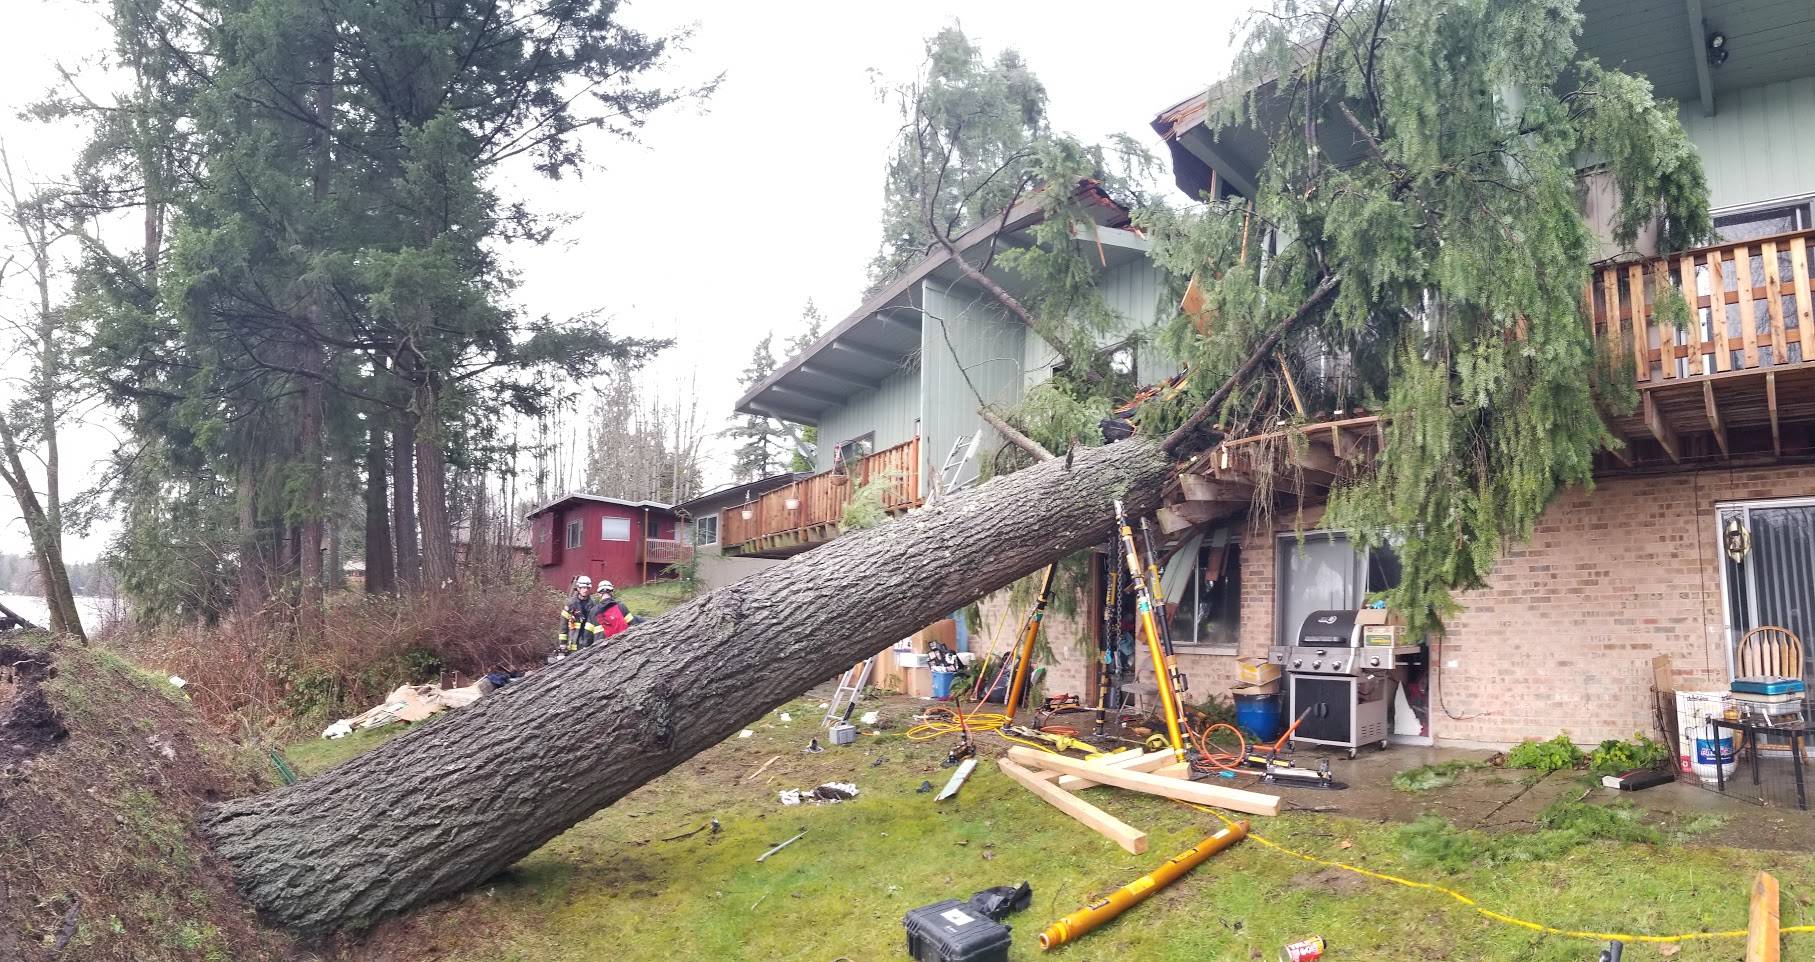 Firefighters and rescue units worked to clear a man who had been pinned under a storm-blown tree that damaged an apartment complex in Renton, unincorporated King County early Sunday. COURTESY PHOTO, Puget Sound Fire